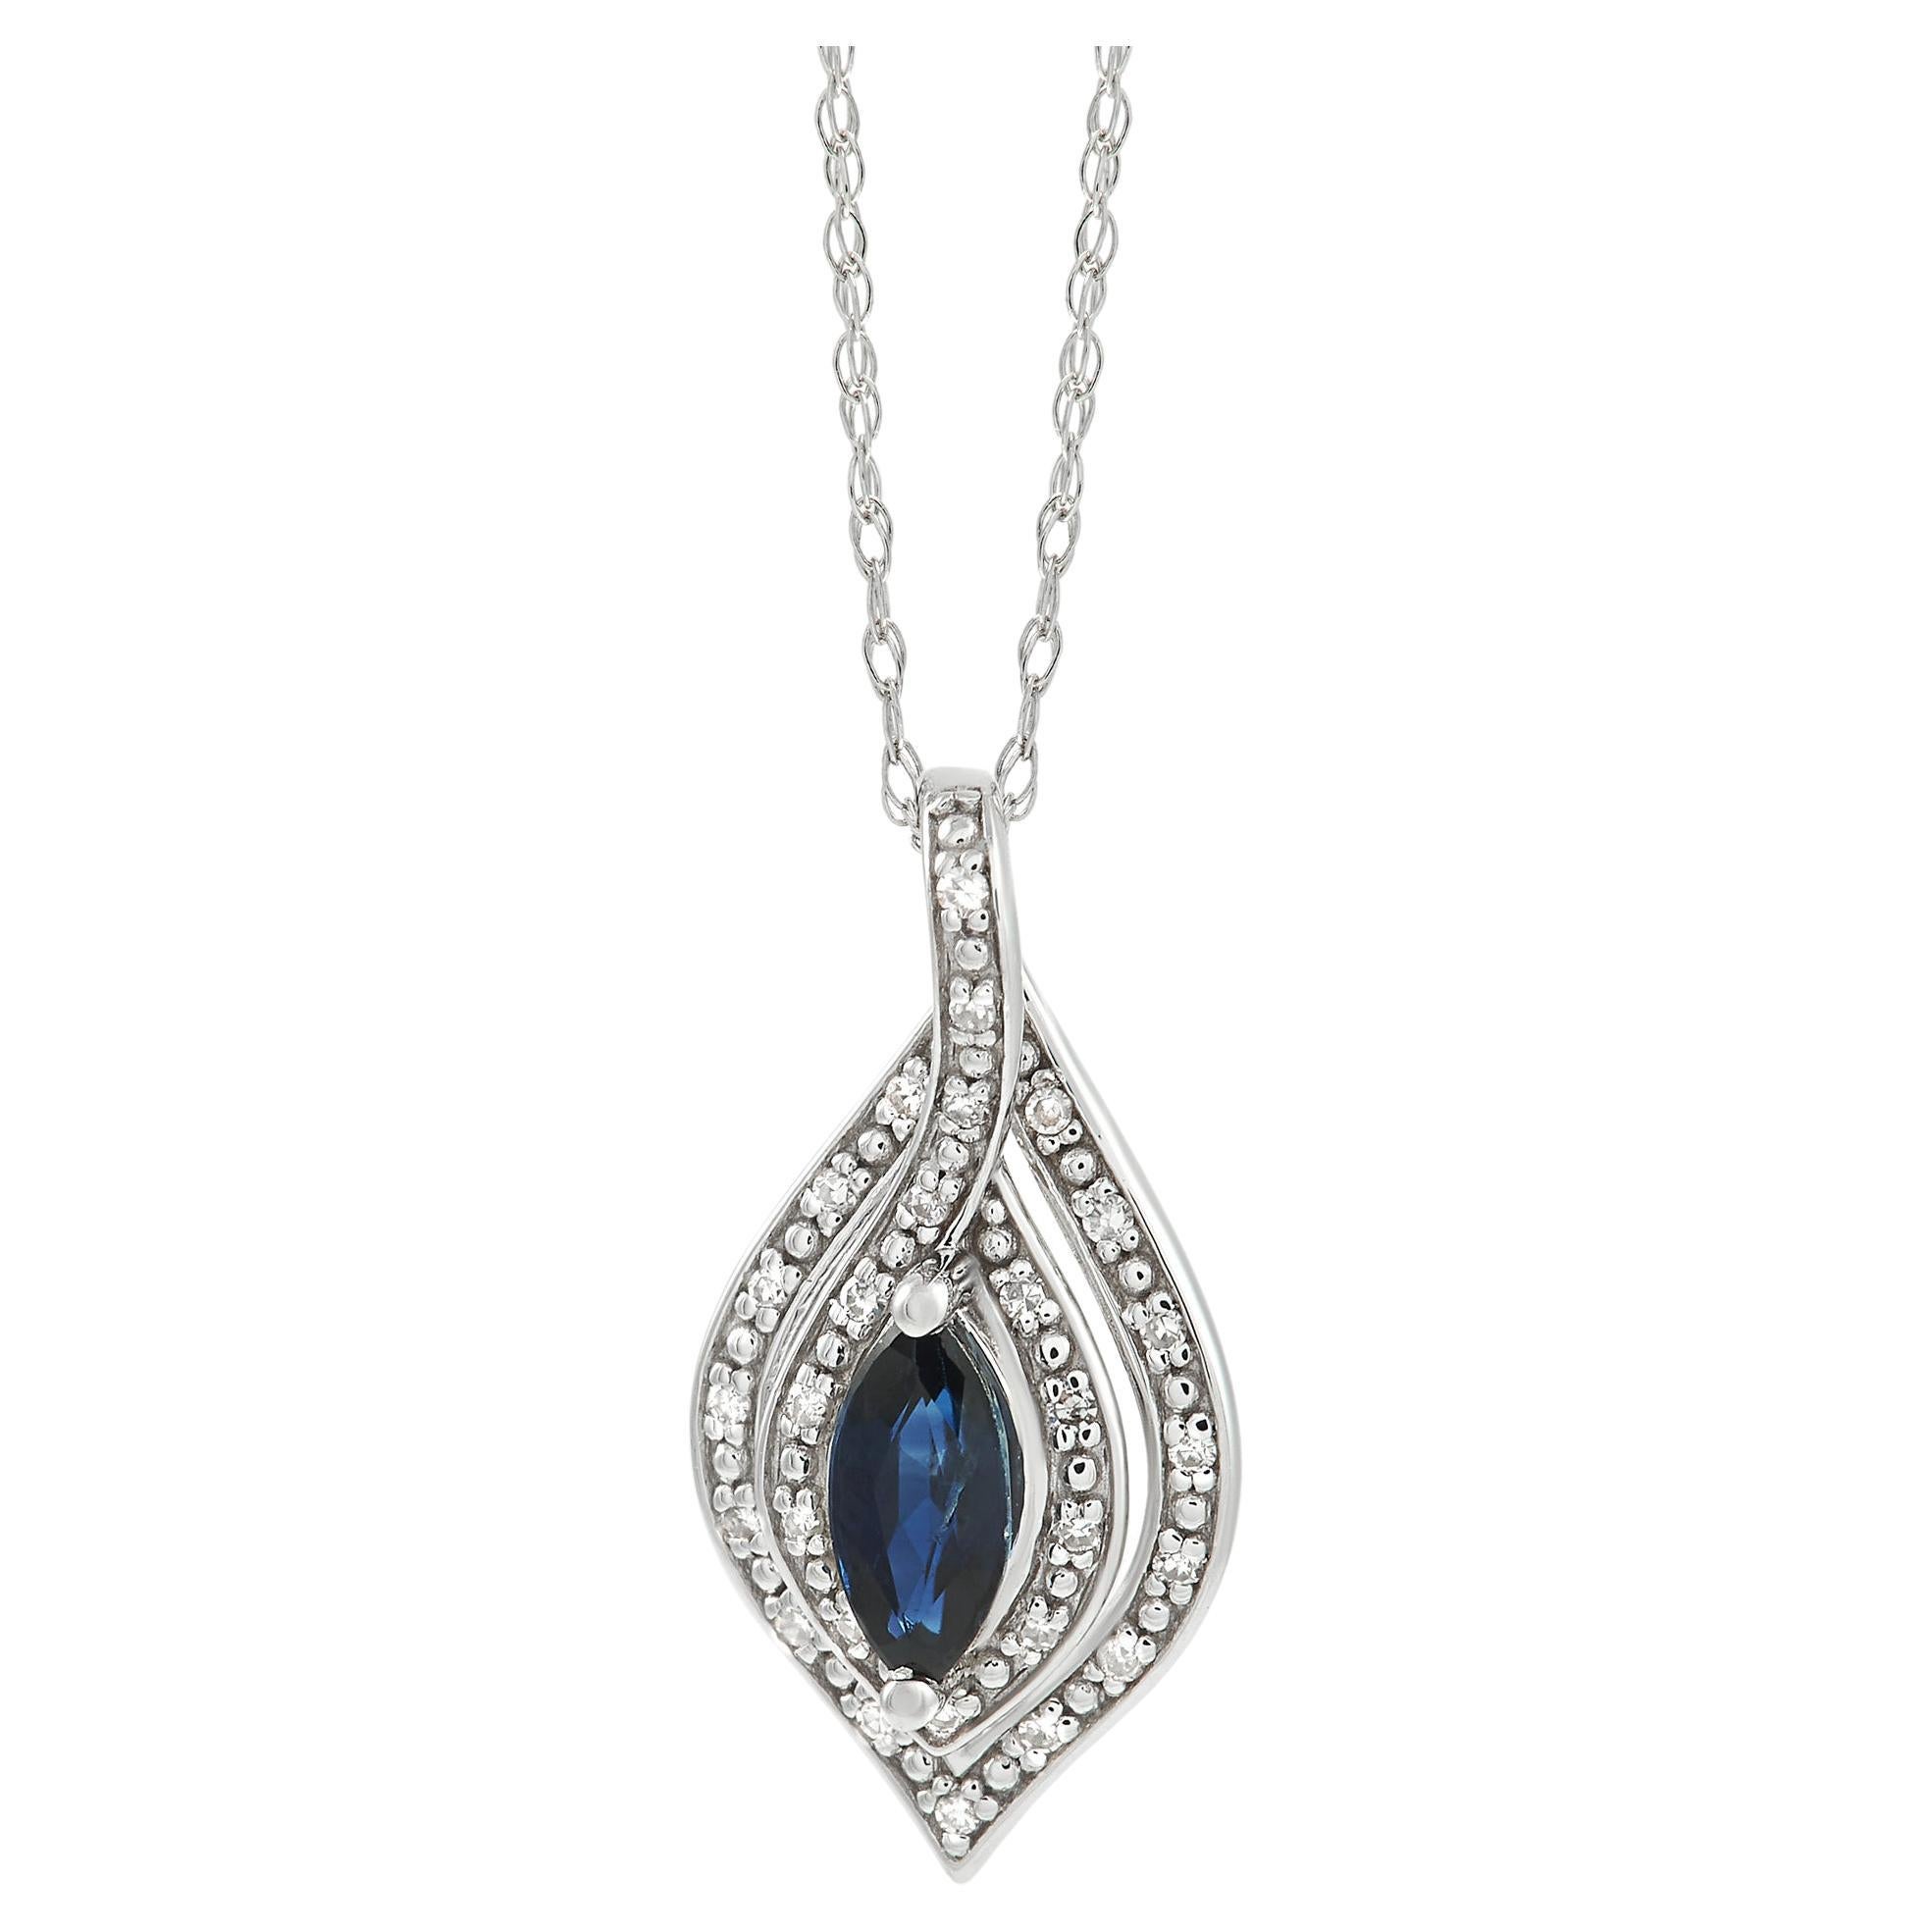 LB Exclusive 14K White Gold 0.08 Ct Diamond and Sapphire Necklace For Sale